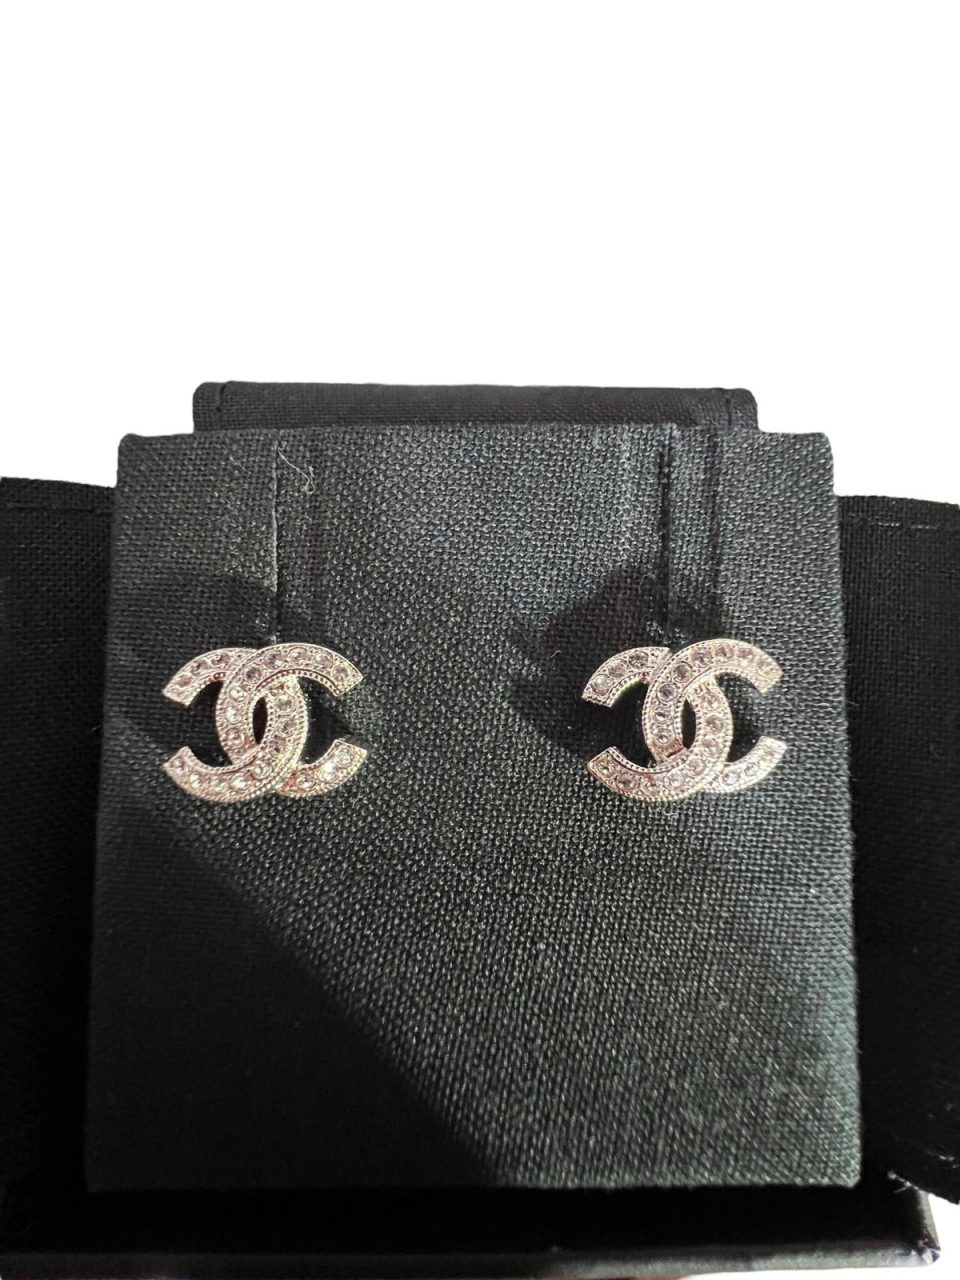 Chanel Classic Mini CC Crystals Earrings in SHW